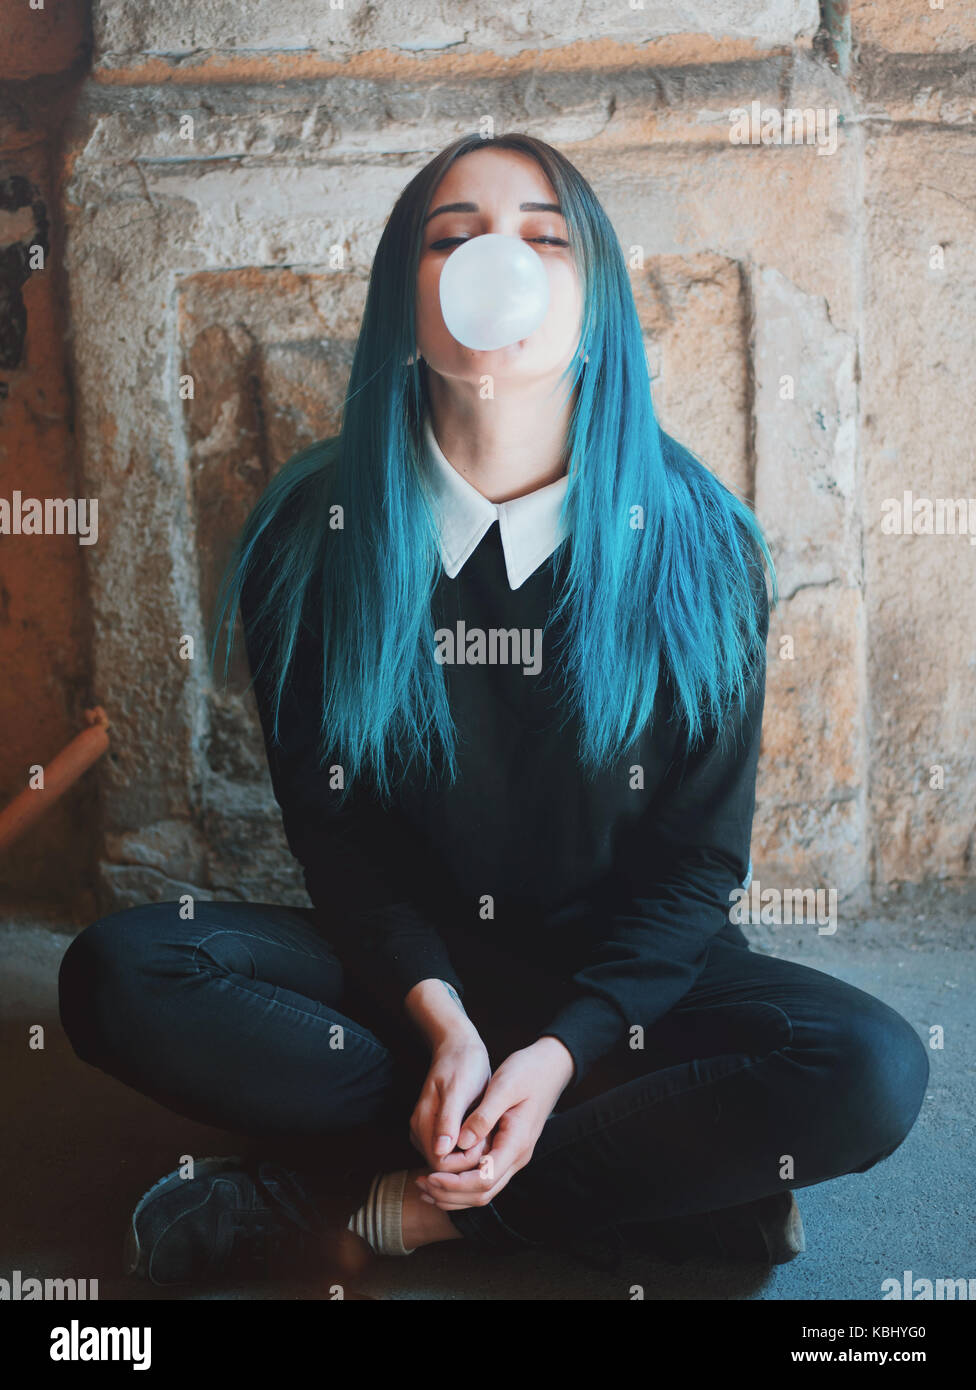 Cute gothic model blows bubblegum. Street punk or hipster woman student with blue colorful dyed hair, piercing,lenses,ears tunnels and unusual hairsty Stock Photo